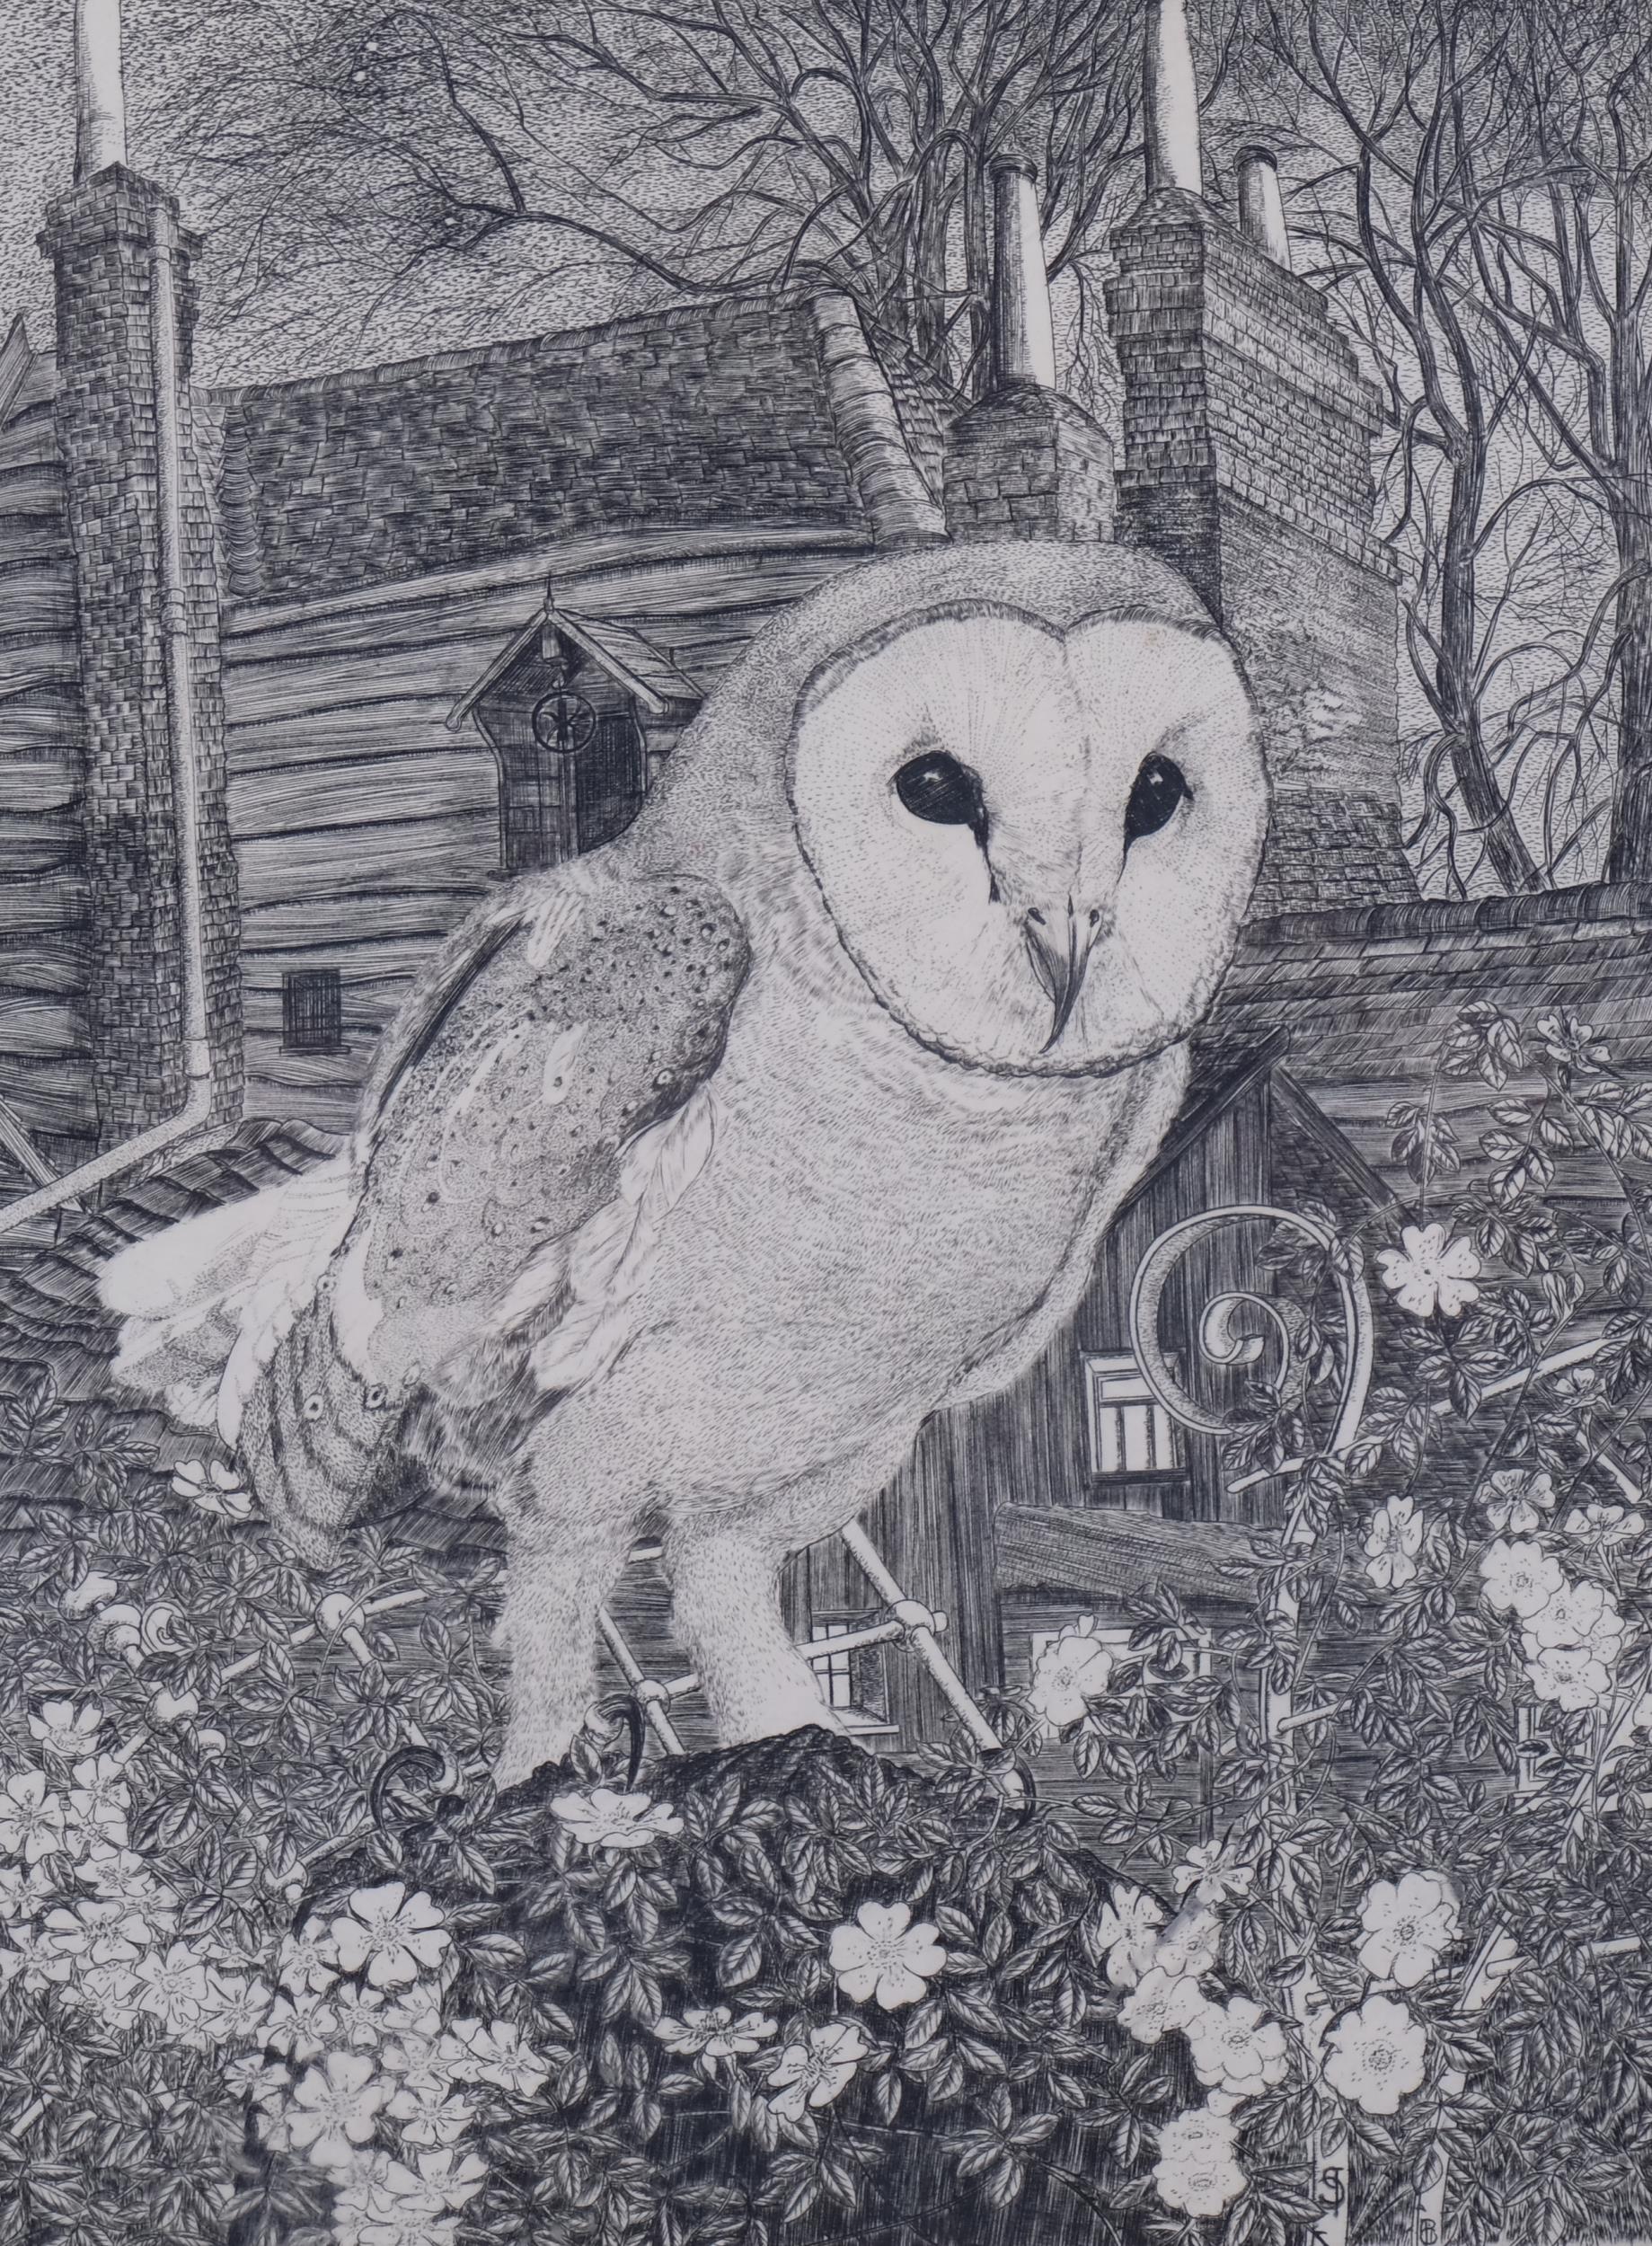 David Vaughan Wicks, barn owl, etching, signed in pencil, dated 1951, plate 22cm x 16.5cm, framed - Image 2 of 4